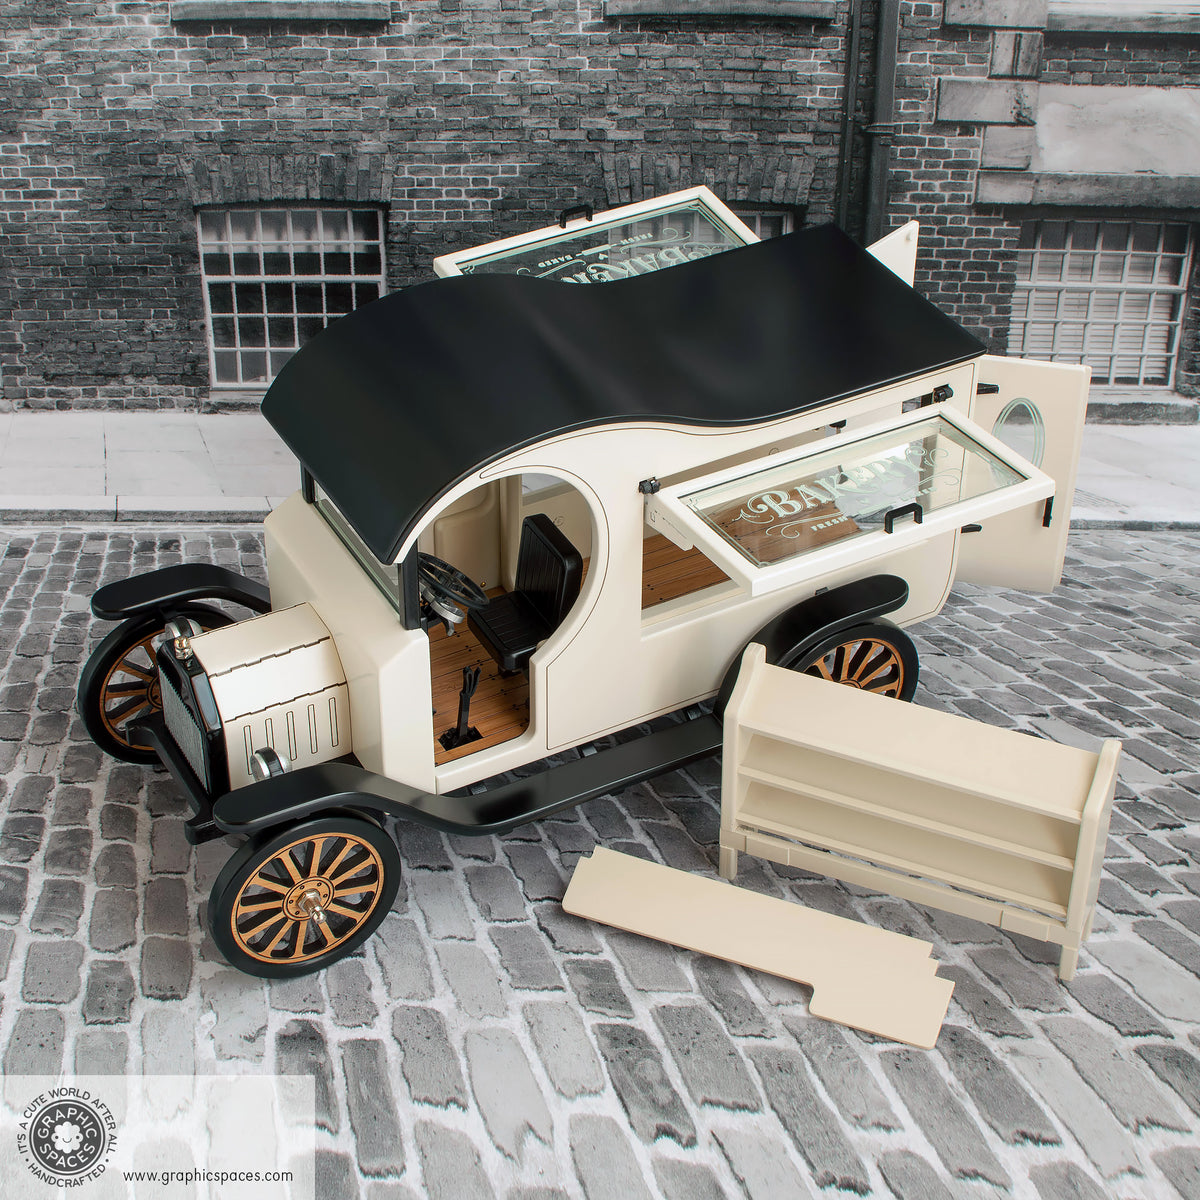 1:12 Scale Room Box White Bakery Shop Truck Model T C Cab. View shows Counter and Shelf options. Windows and doors open.